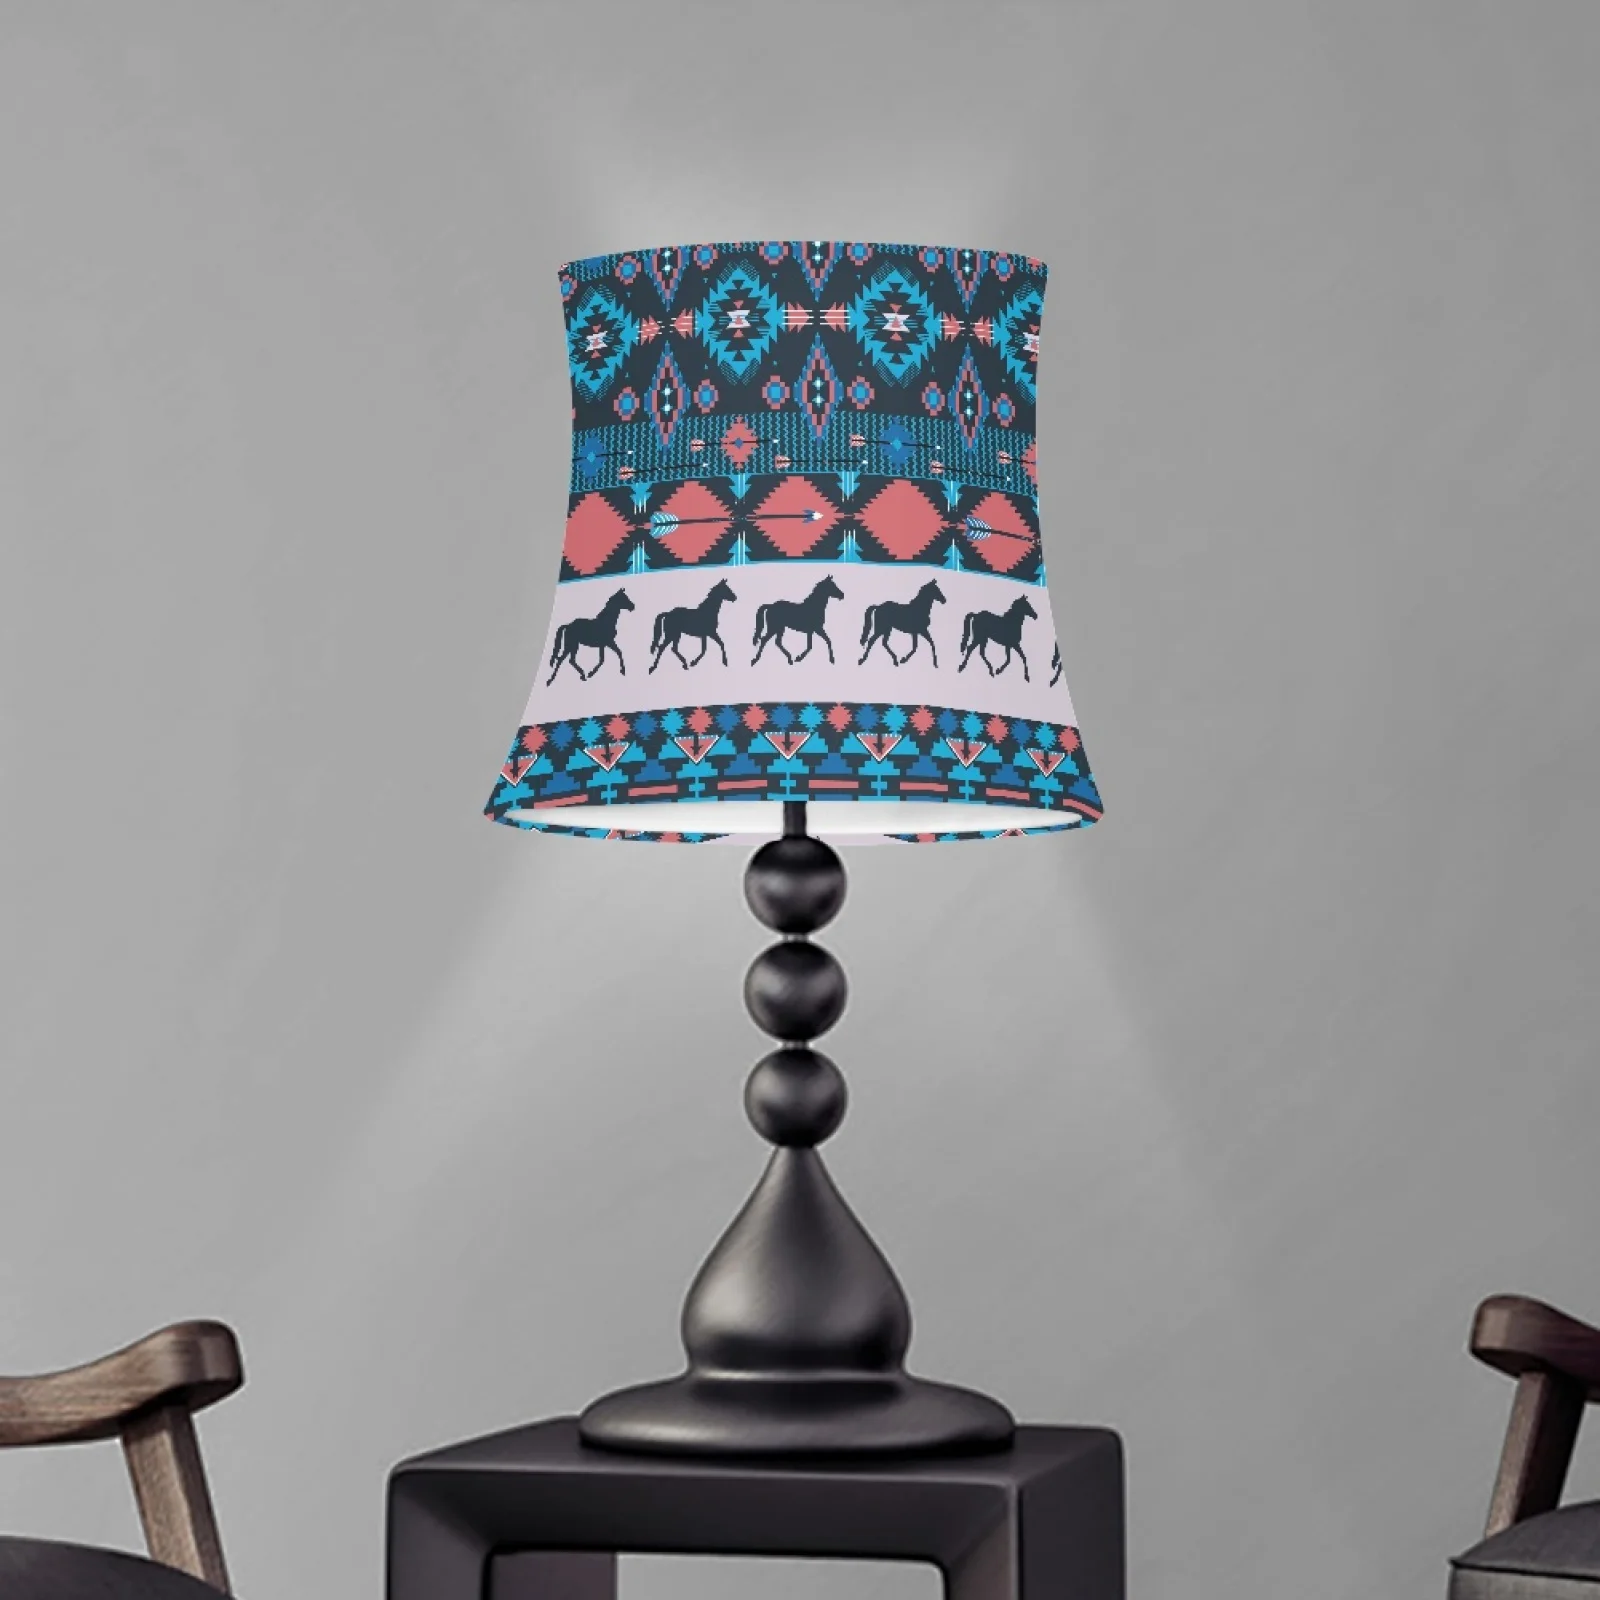 

Indian Tribal Horse Light Shade Cover Cylinder Lampshade Modern Light Shade for Table Lamp/ Wall Lamp/Floor Lamp Shade Covers